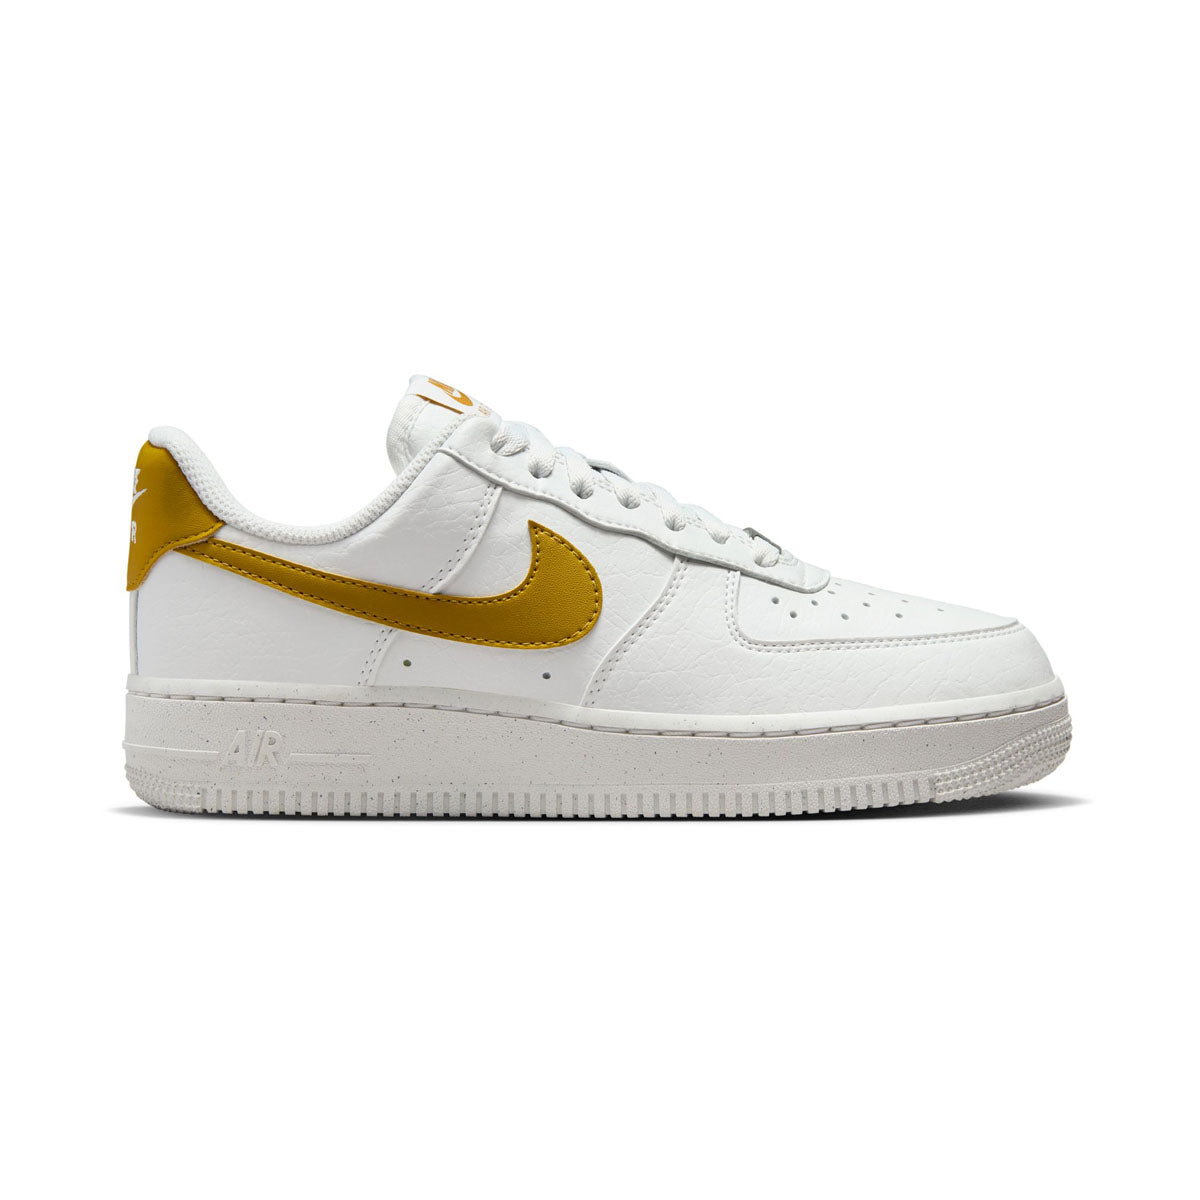 Nike Air Force 1 '07 SE Women's Shoes.